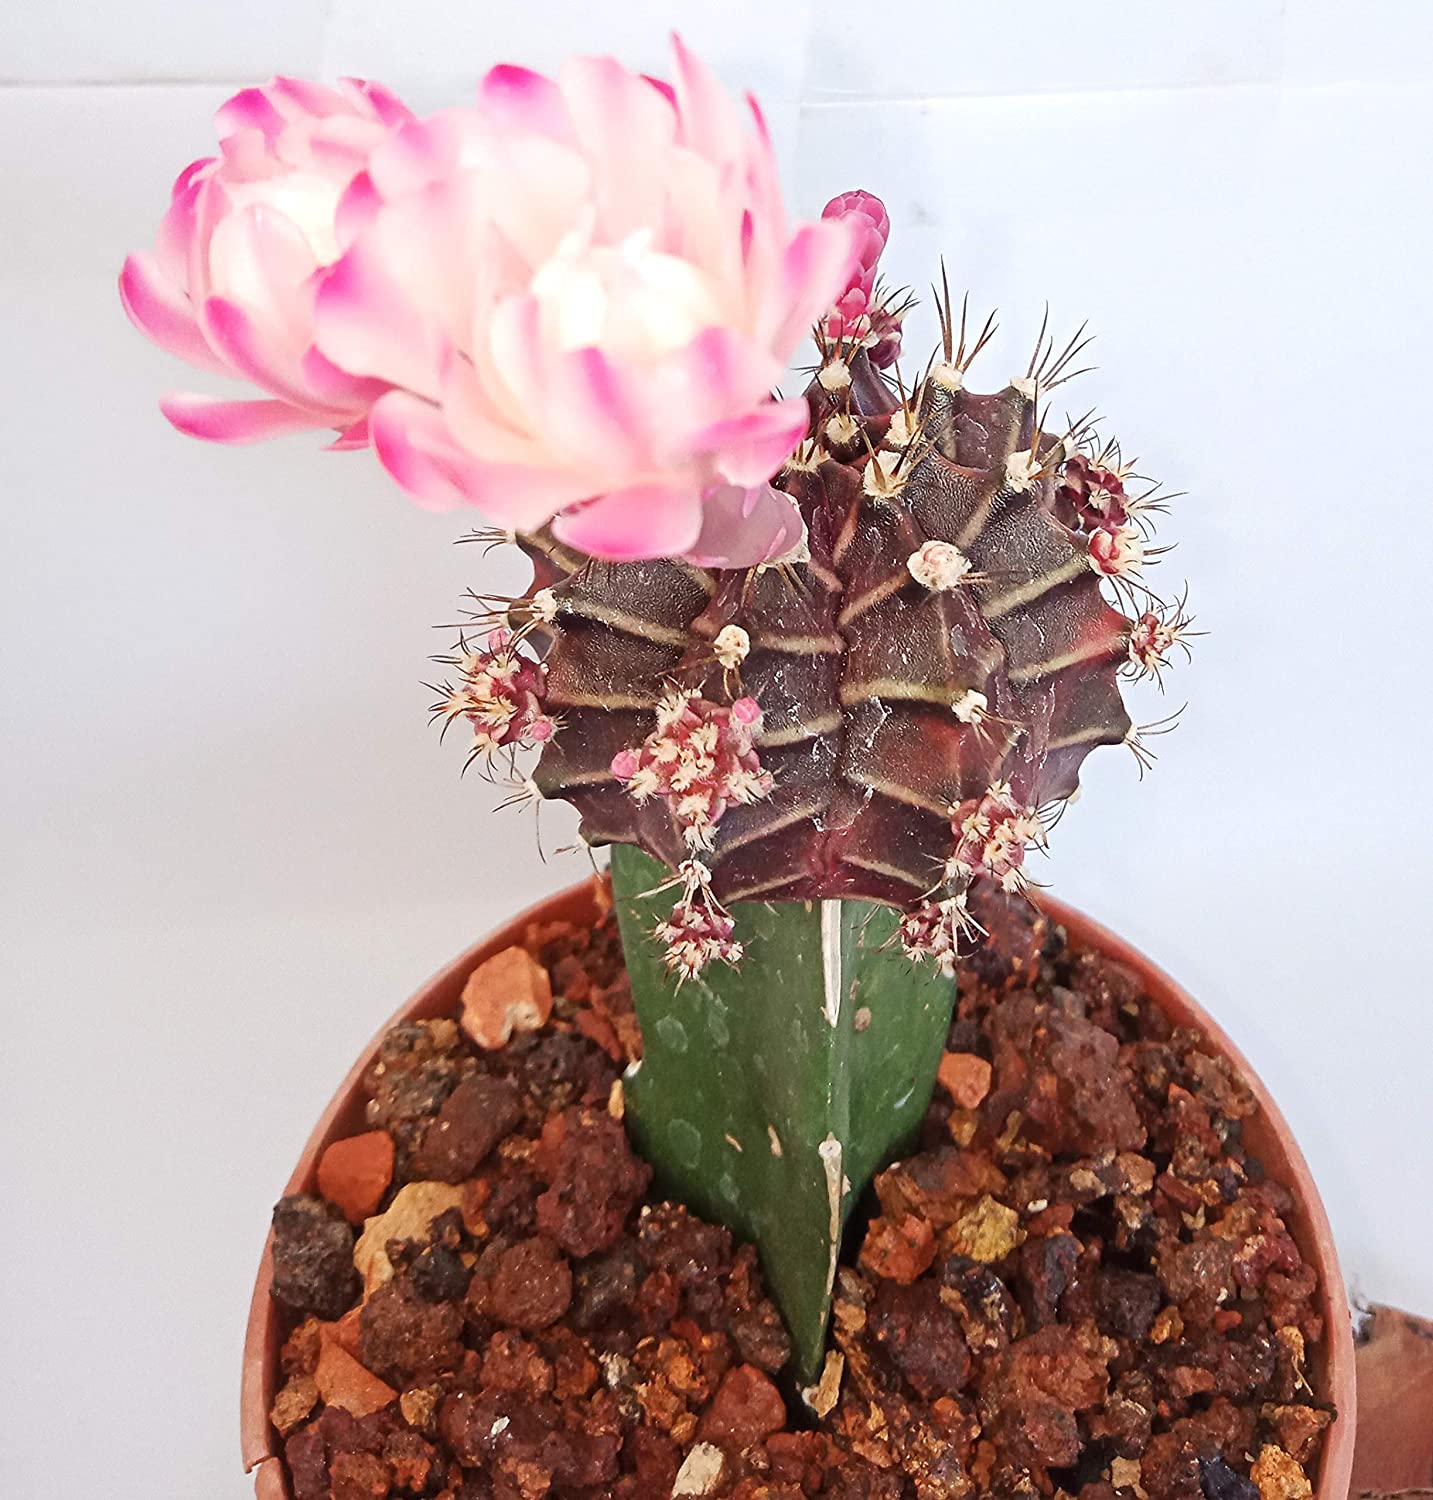 New Flowering Moon cactus Live Plant With Pot